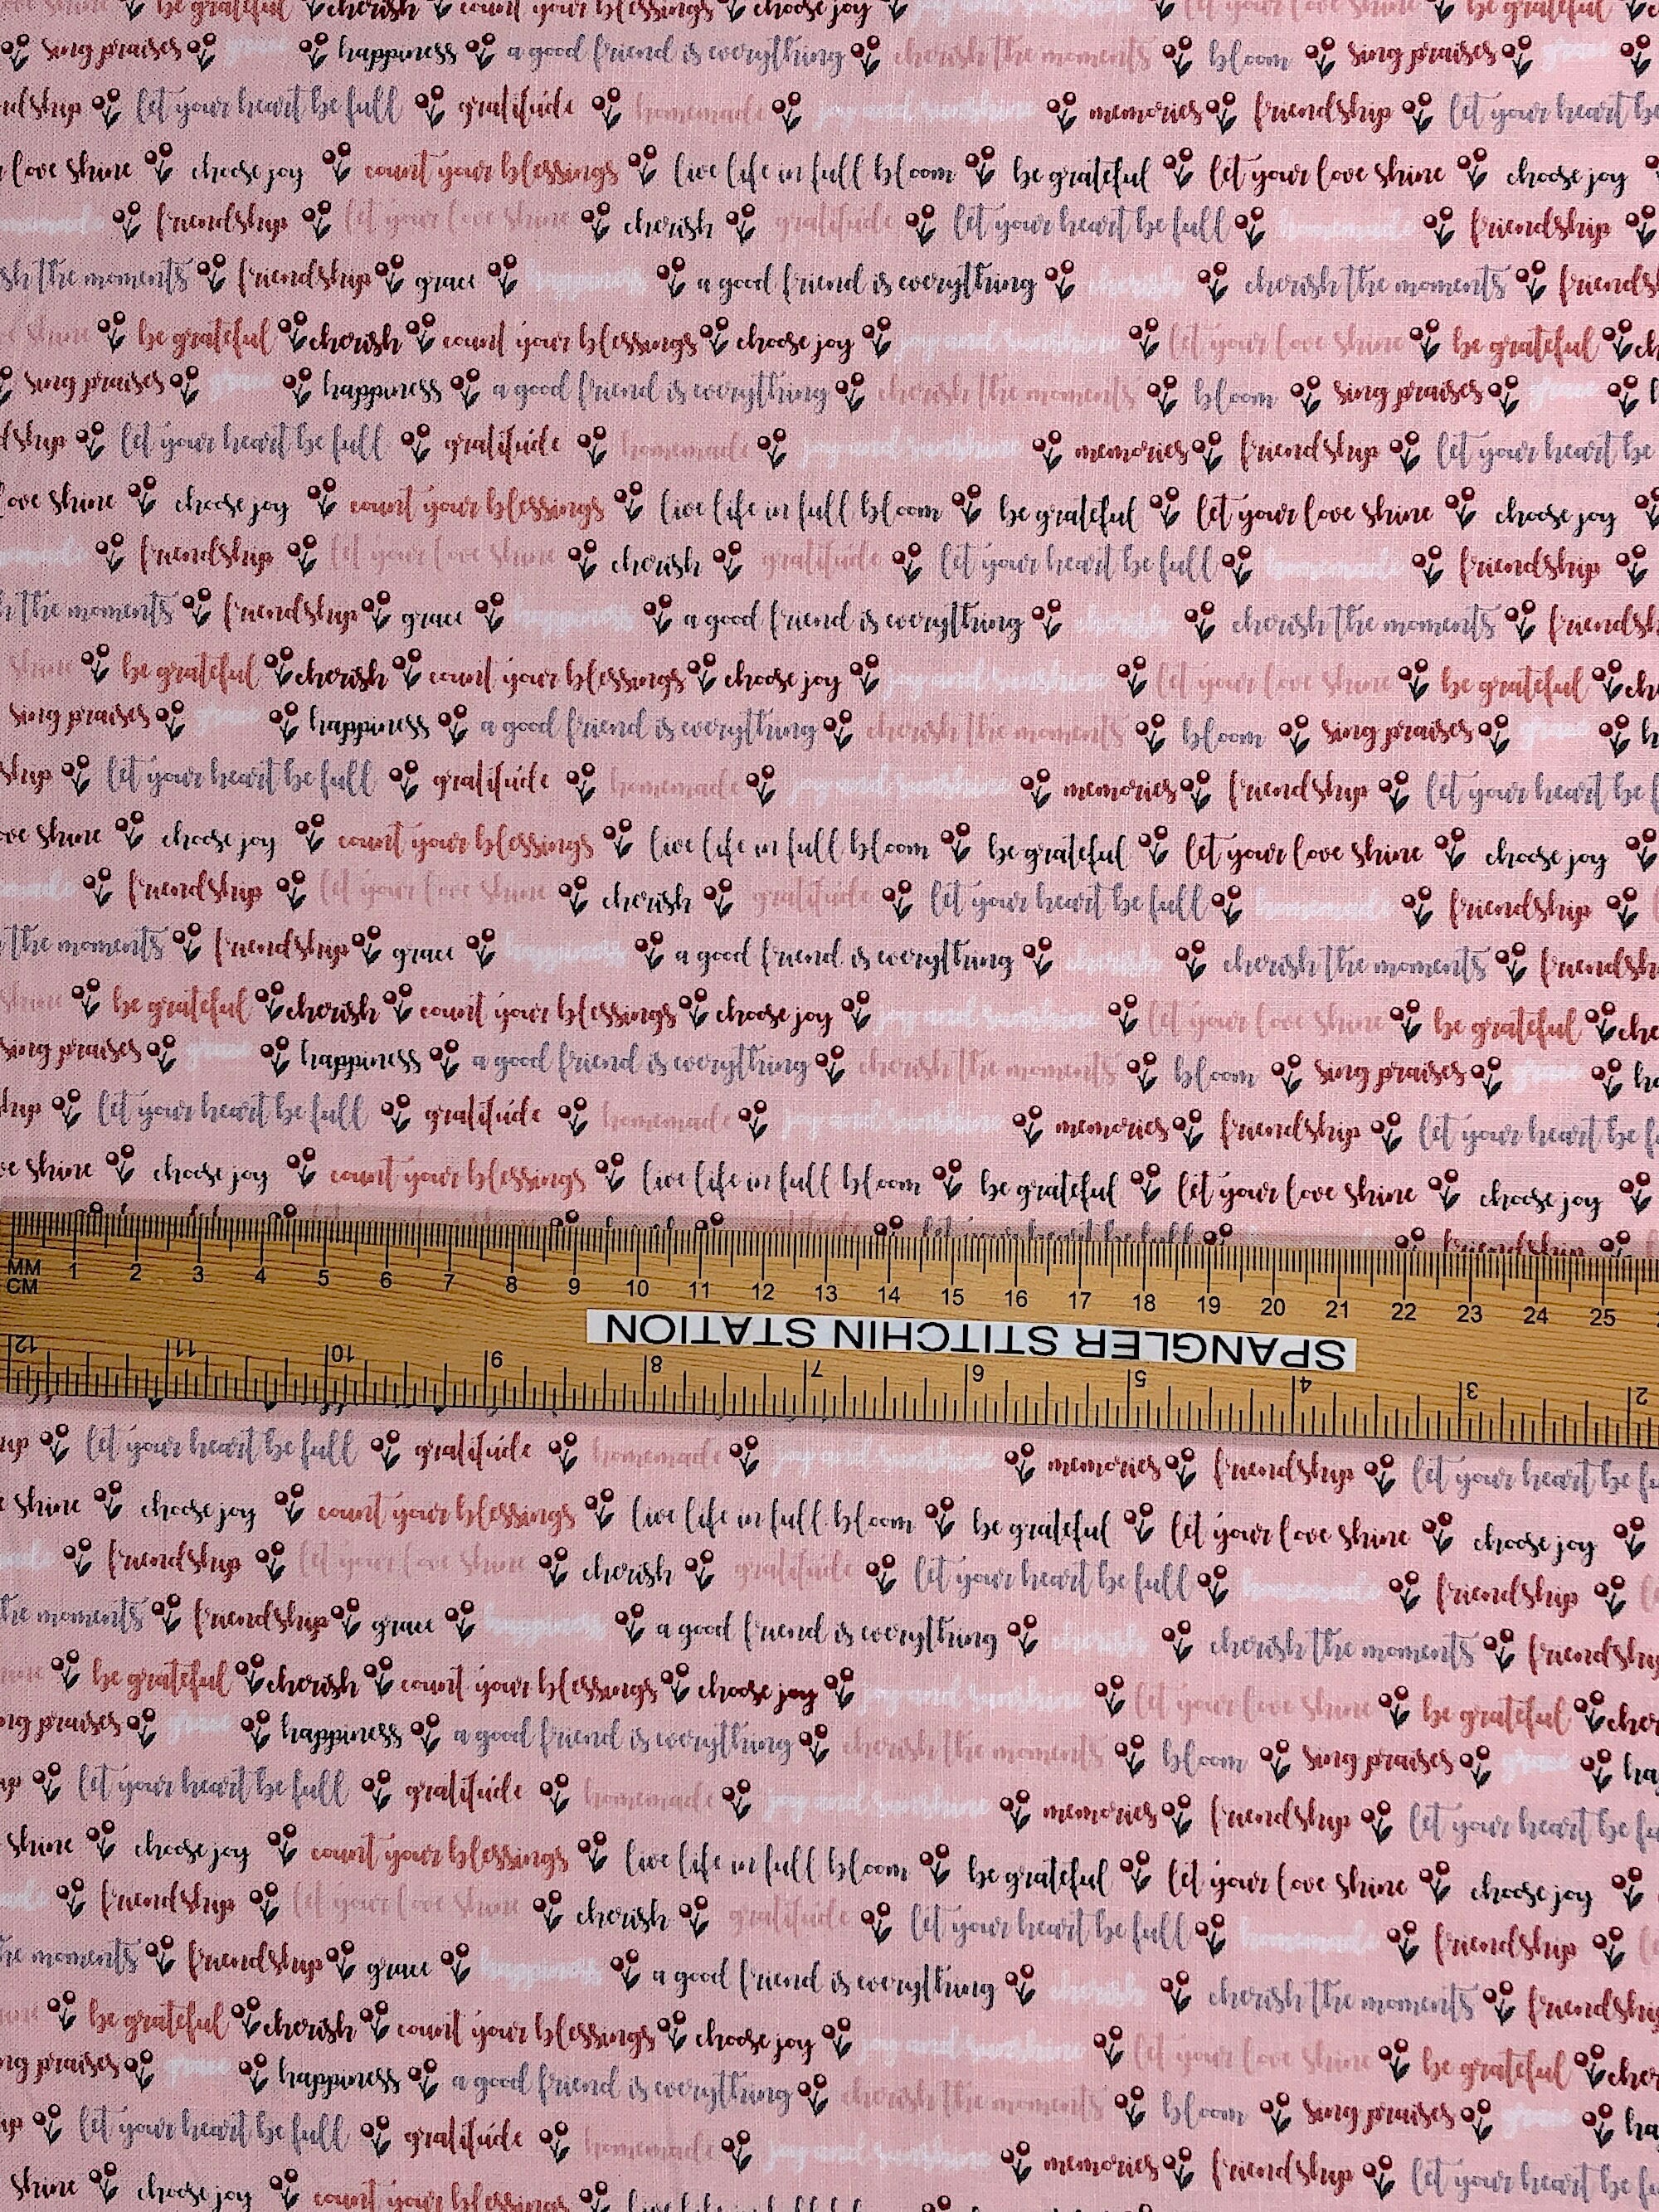 Ruler on fabric to show width.